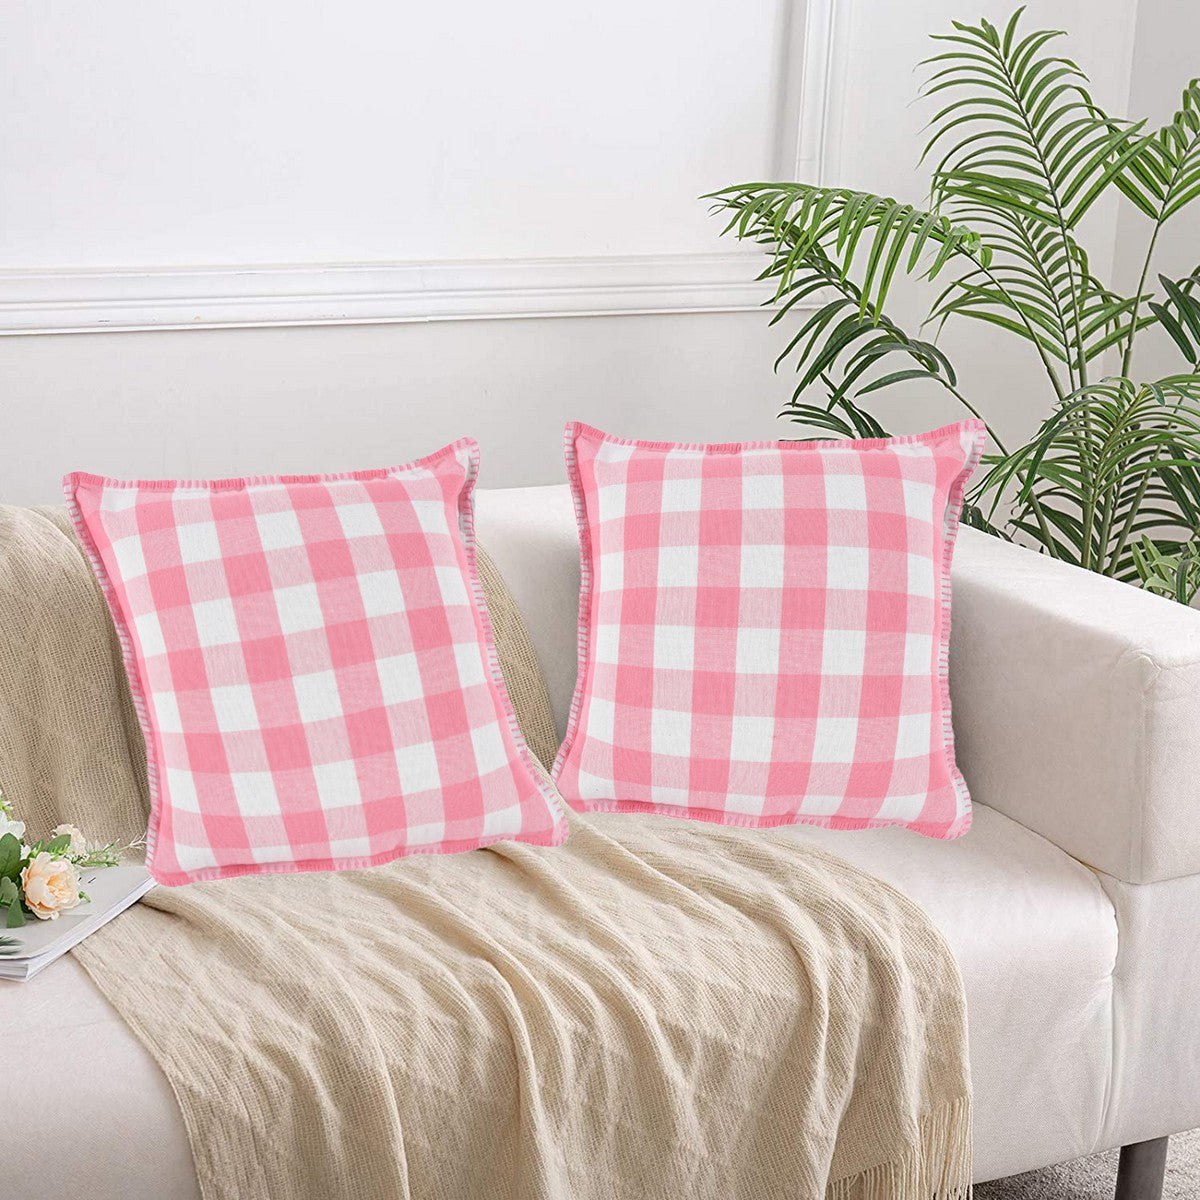 Lushomes Square Cushion Cover with Blanket Stitch, Cotton Sofa Pillow Cover Set of 2, 16x16 Inch, Big Checks, Pink and White Checks, Pillow Cushions Covers (Pack of 2, 40x40 Cms)